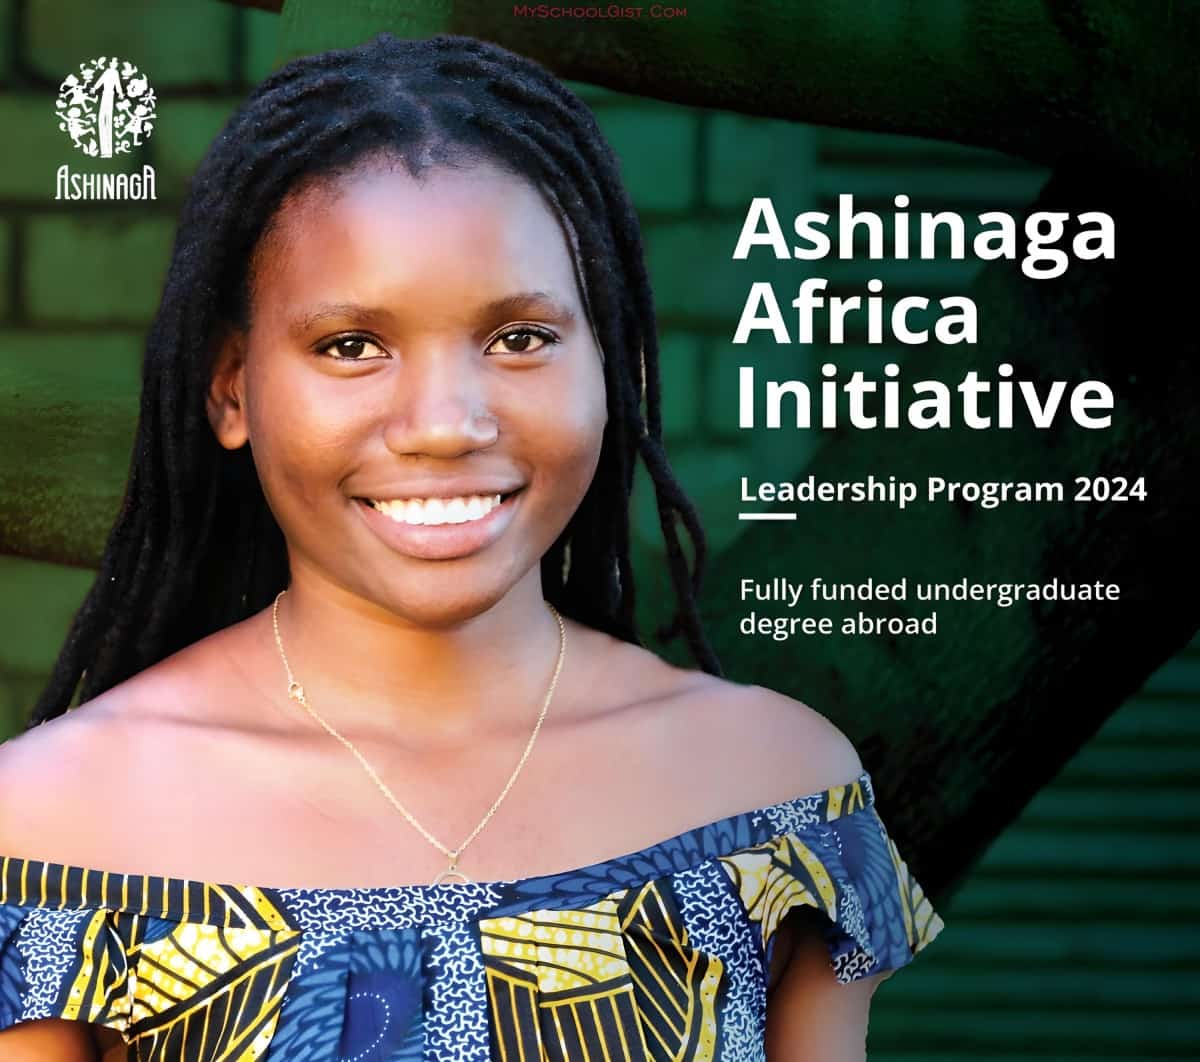 Ashinaga Africa Initiative Leadership Program 2024 for young African orphans |Fully Funded to study abroad